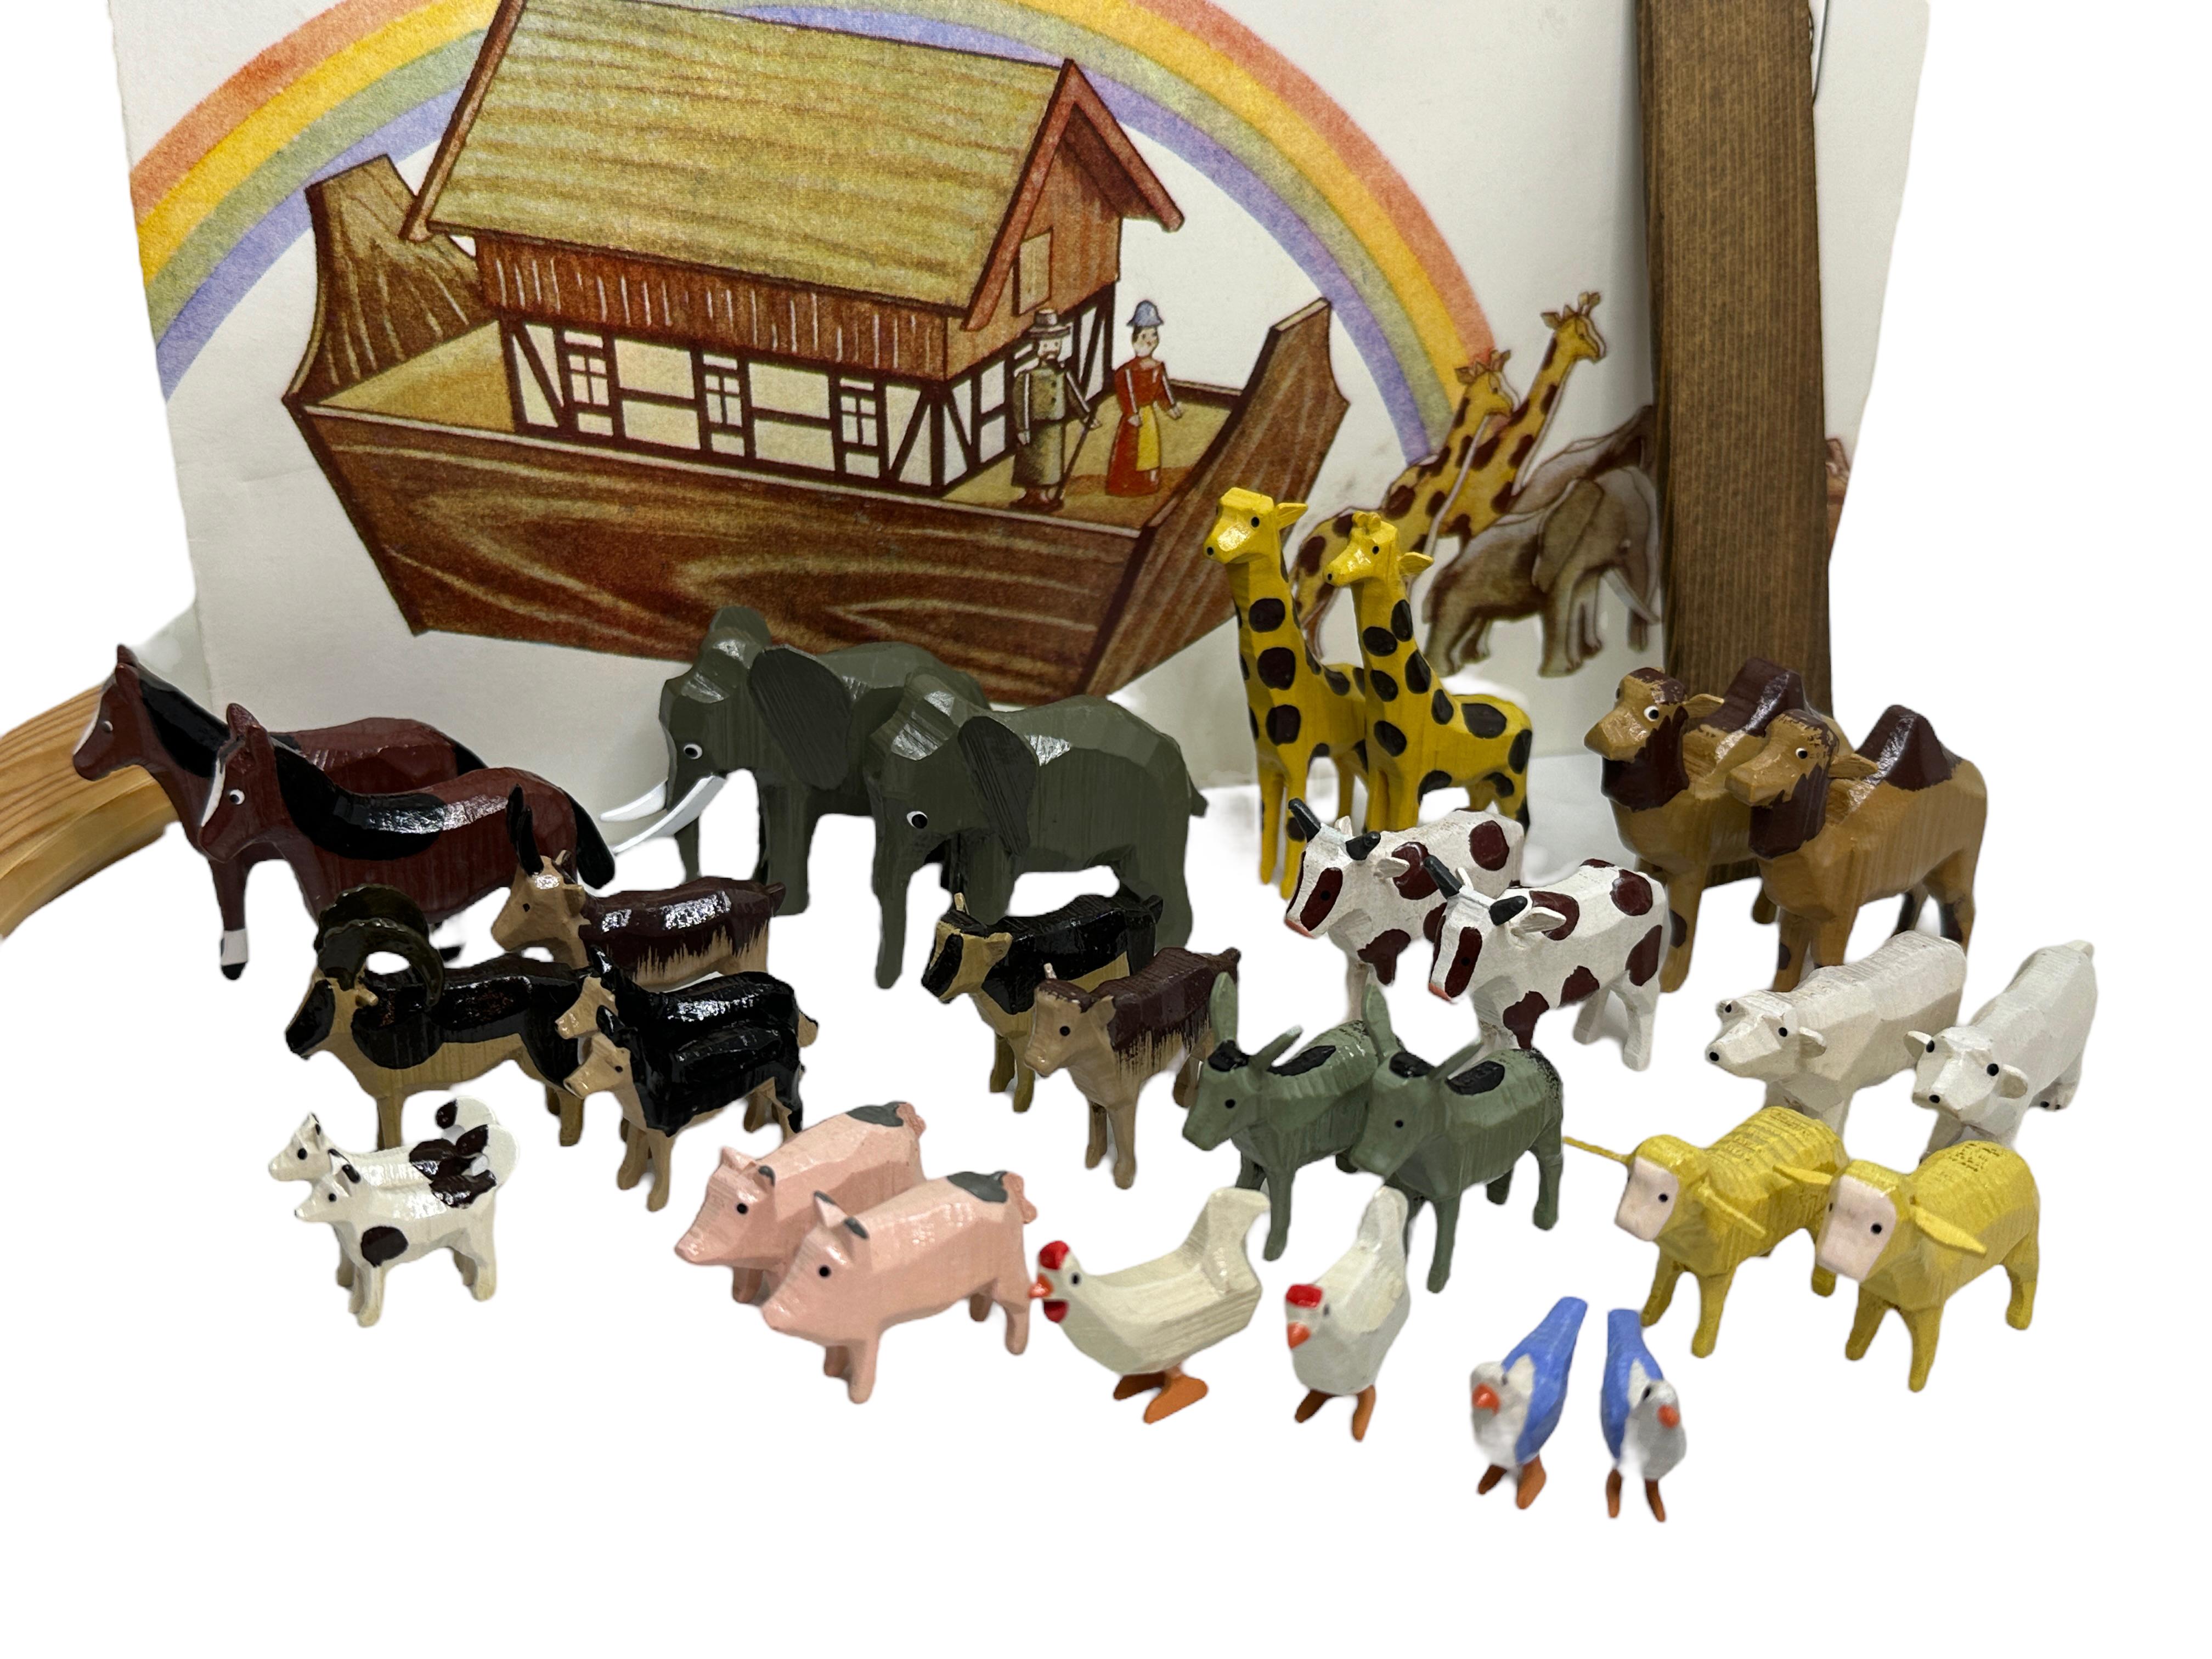 20th century Erzgebirge German Noah’s Ark. A wonderful example of a 20th century Erzgebirge German Noah’s Ark, With 36 assorted hand carved figures. Typically, children played with these toys in the late 20th century and being a special treat on